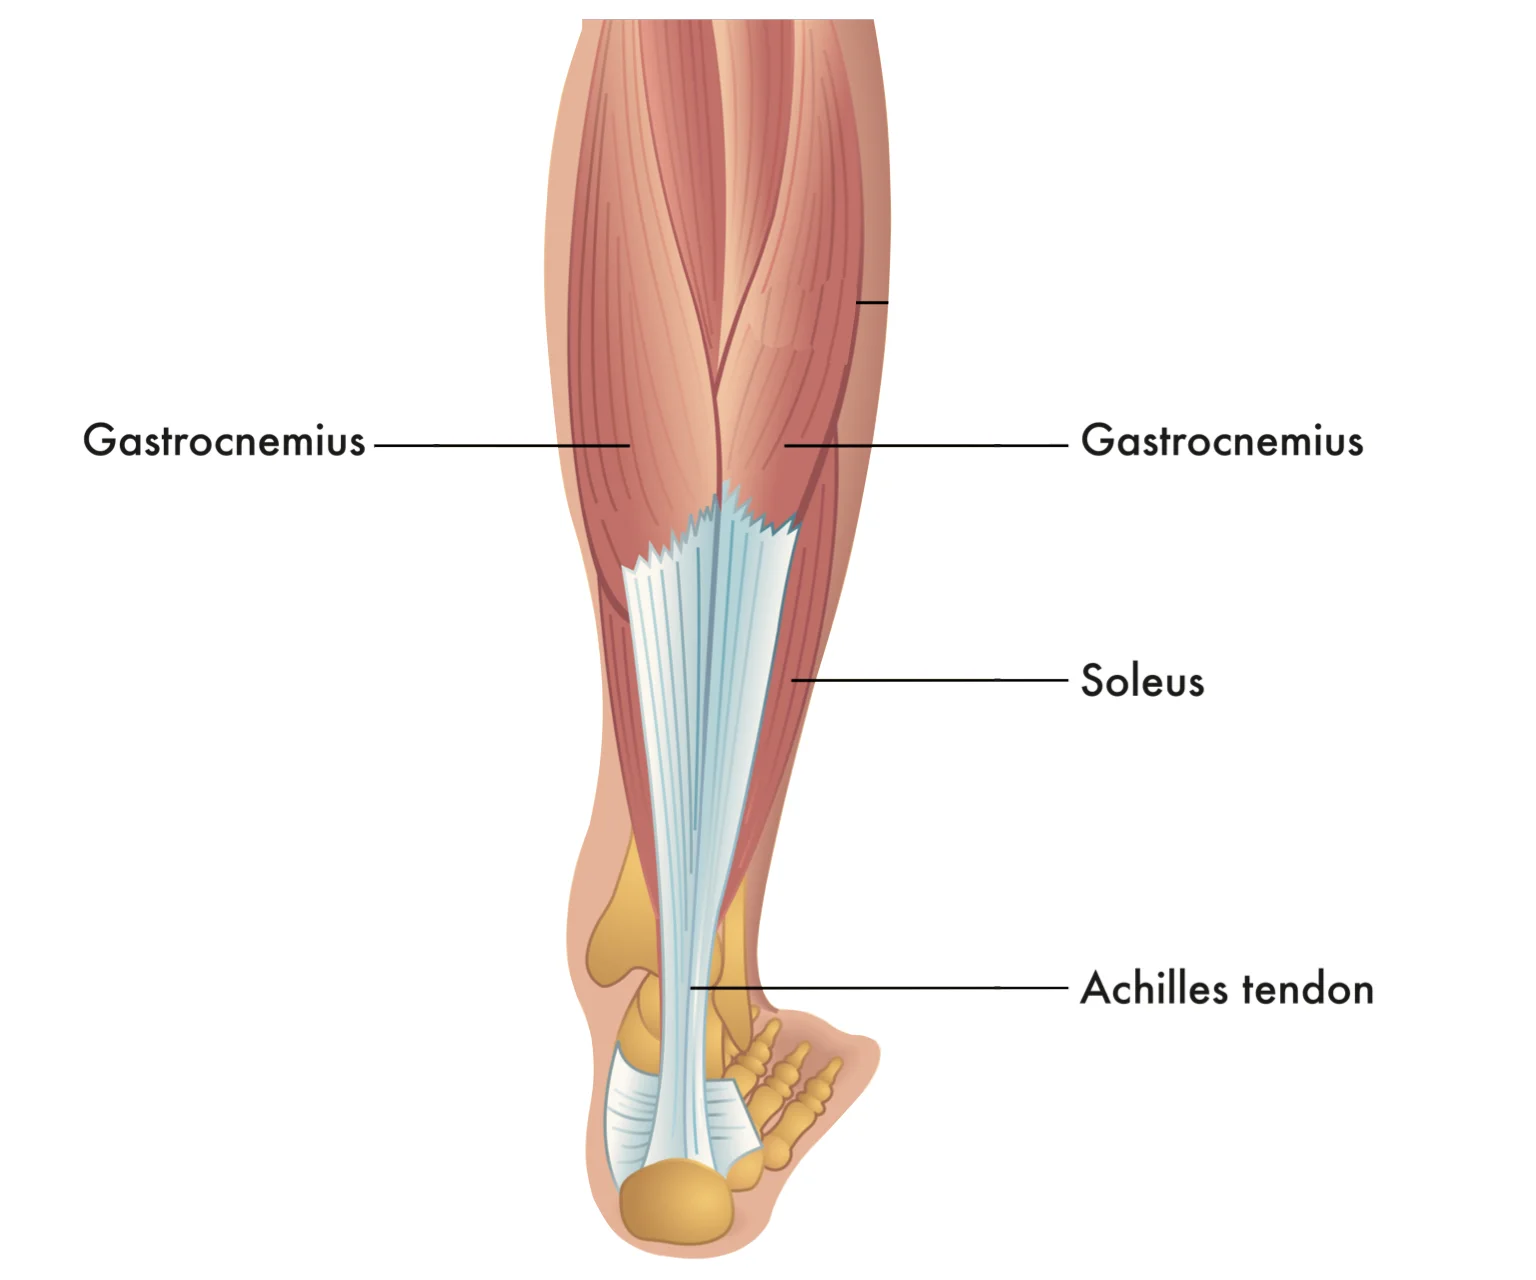 diagram - View of the back of the lower leg, showing the position of the calf muscle. The diagram shows how the gastrocnemius and soleus muscles connect to the Archilles tendon.